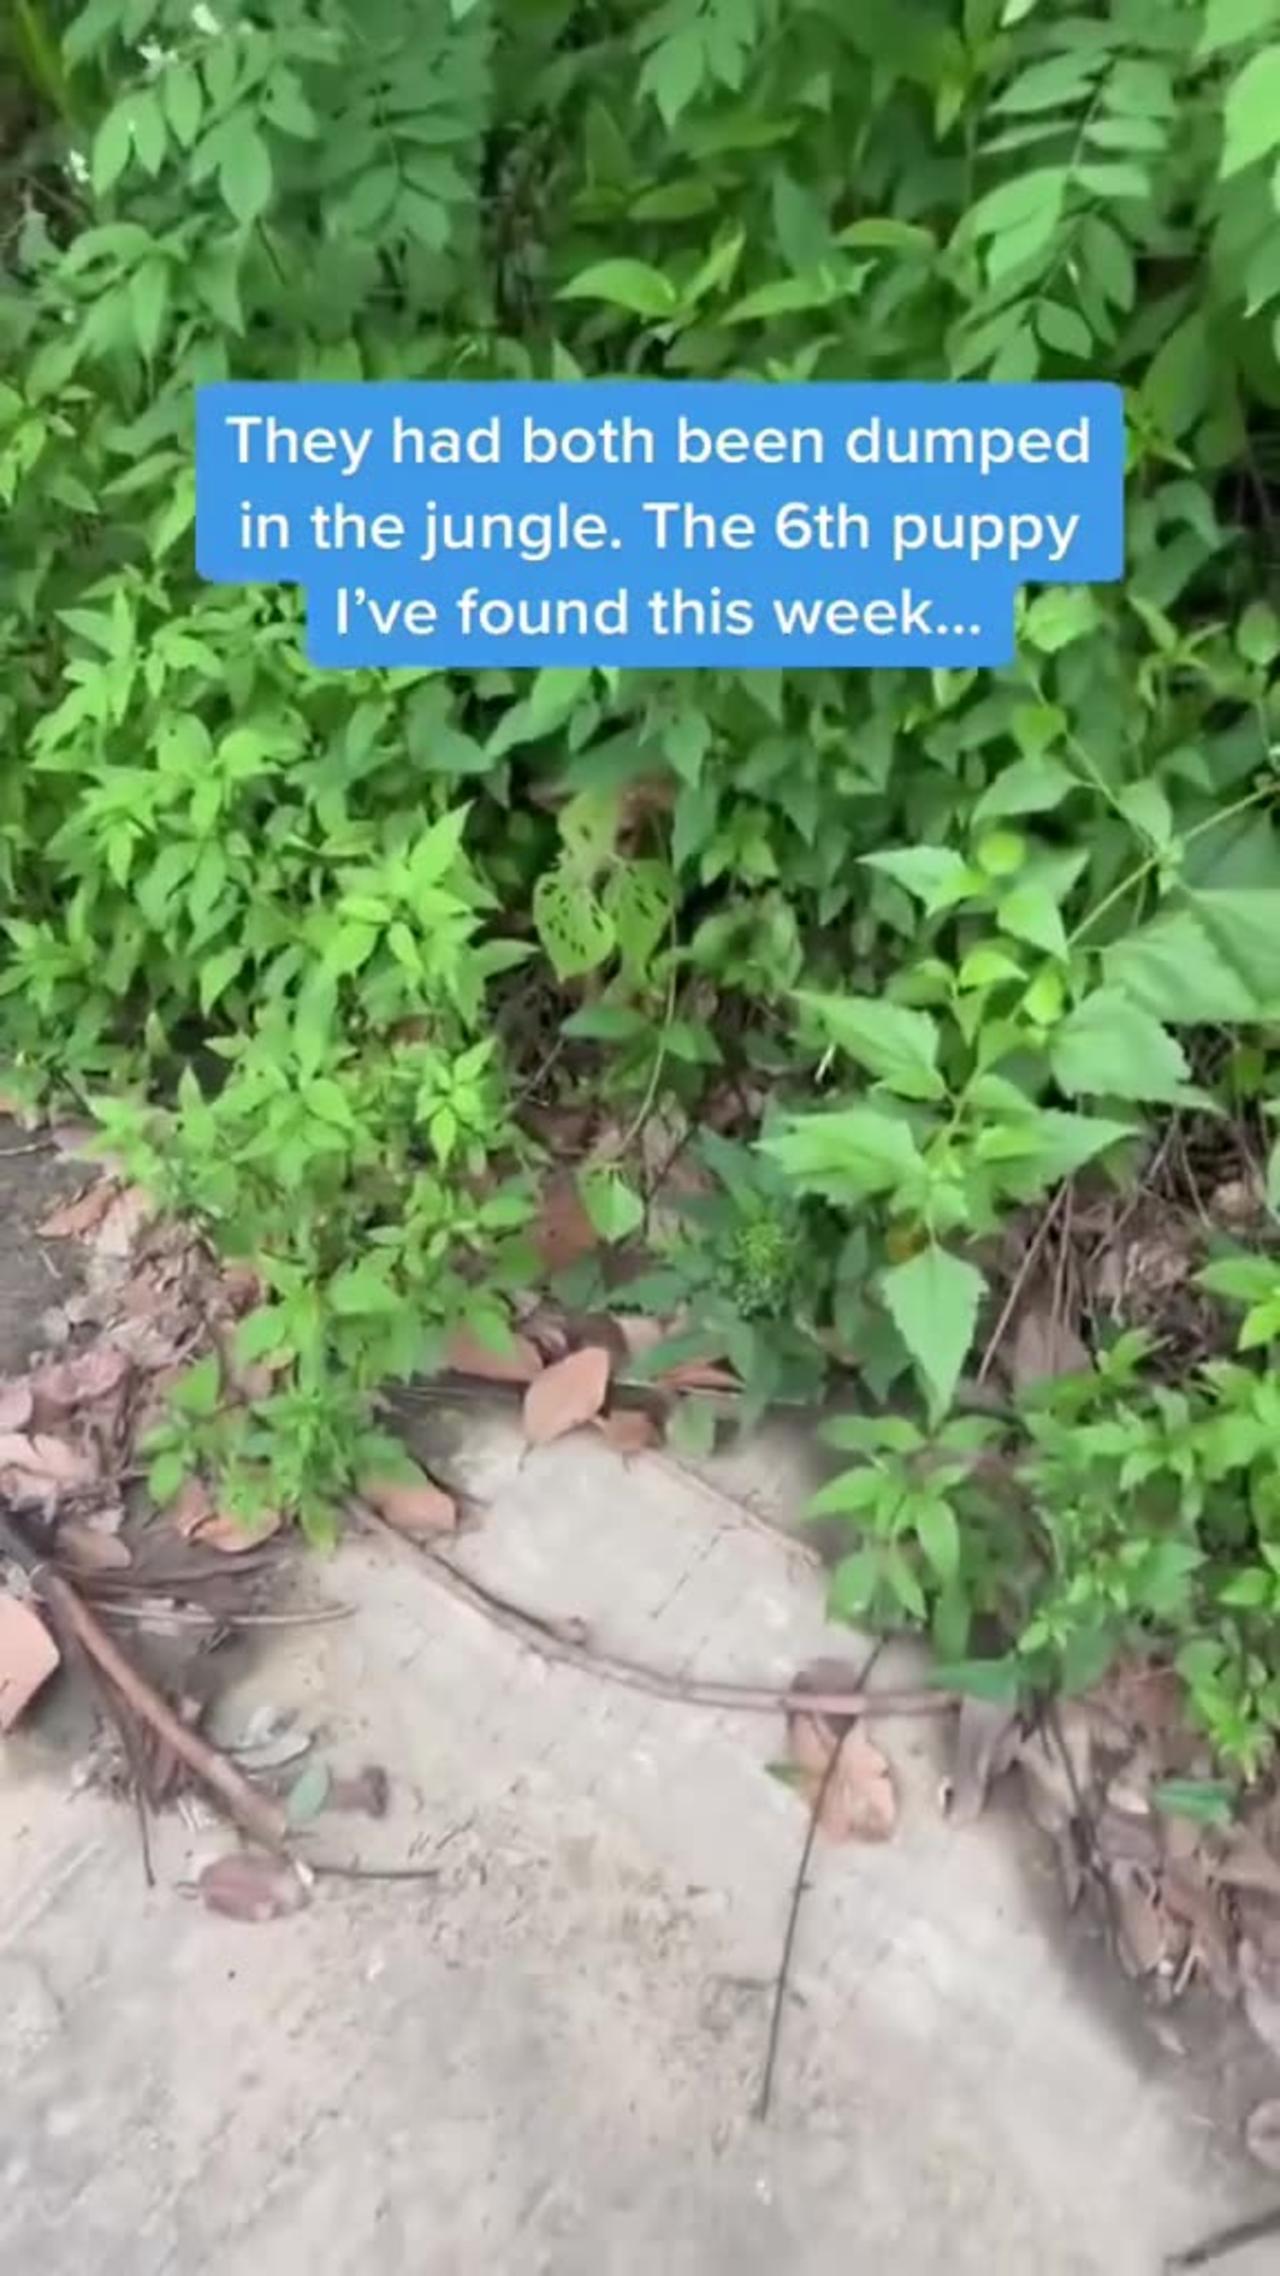 He was thrown into the jungle 😢